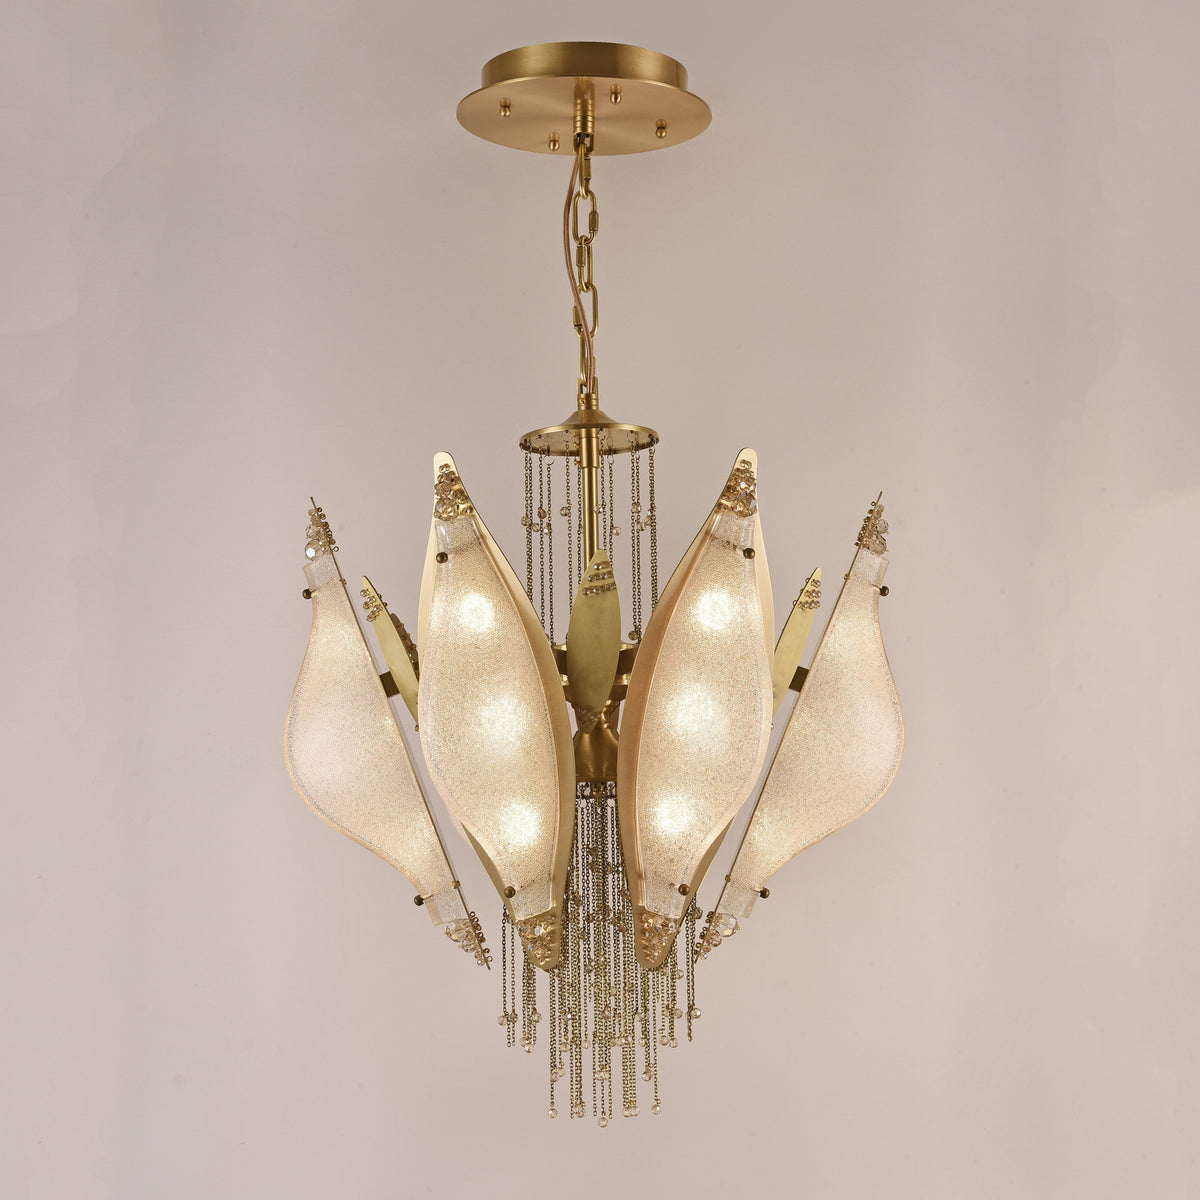 Aria Closed-Flower Crystal Murano Chandelier